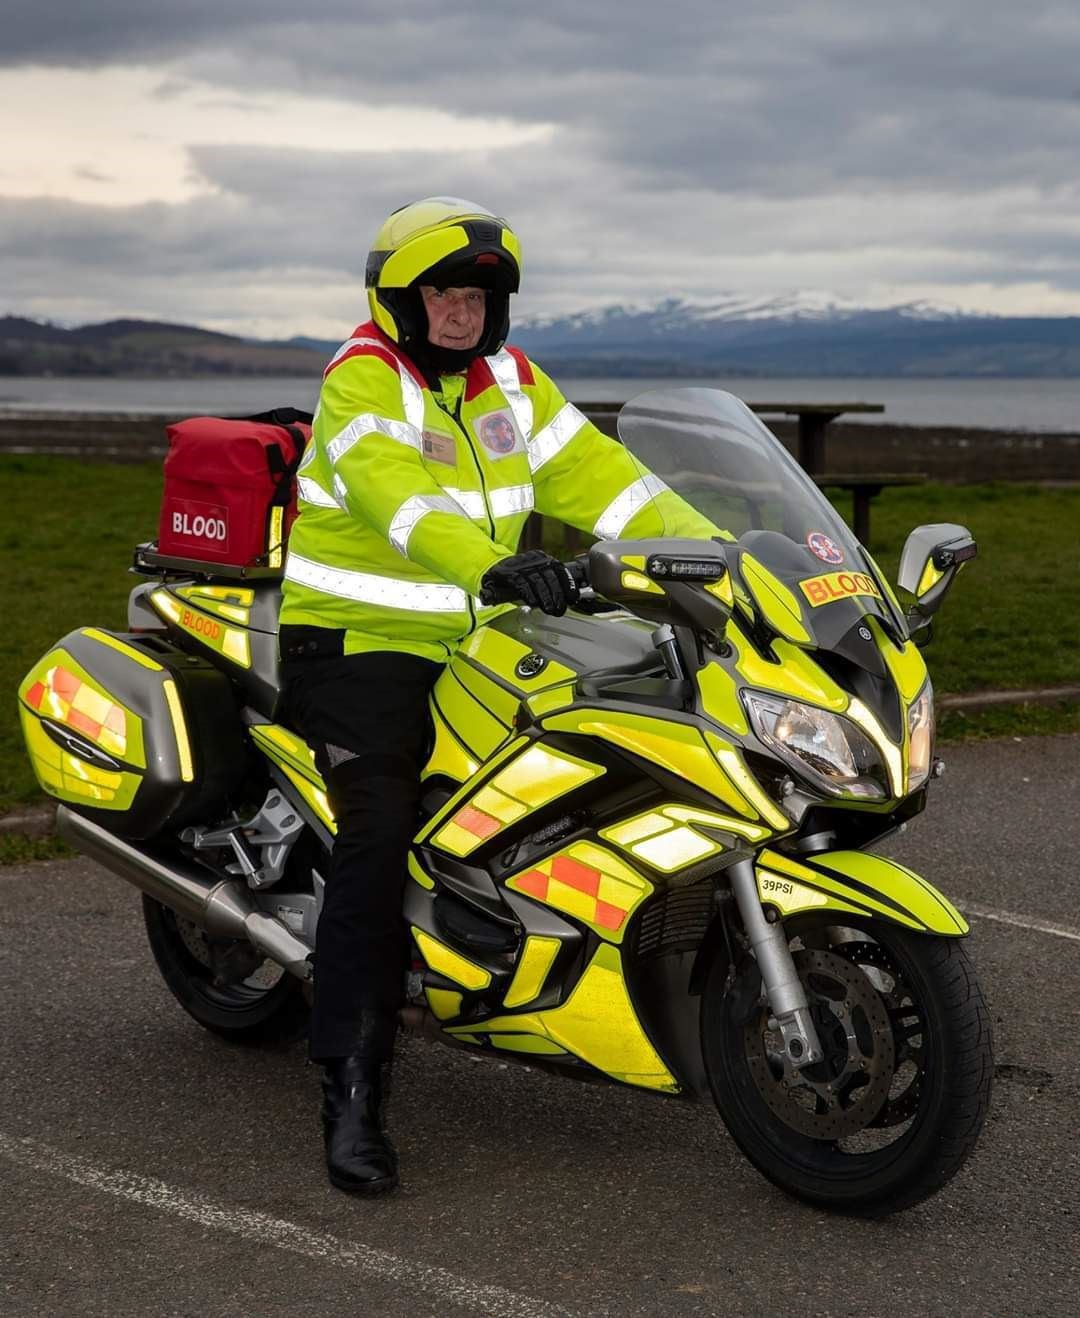 Ross Sharp, of Highlands and Islands Blood Bikes.